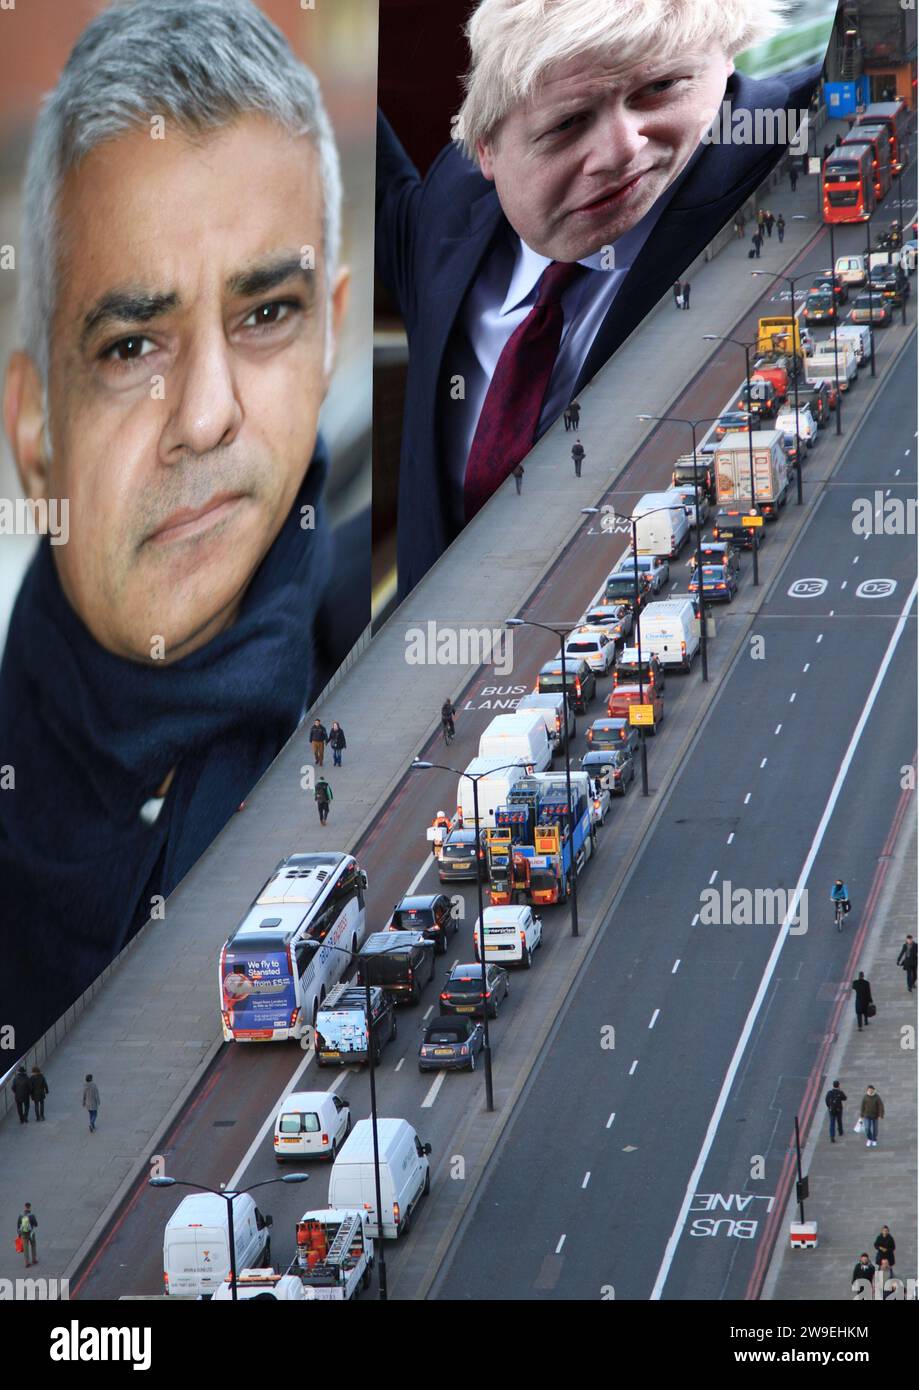 London traffic. Mayor of London. Sadiq Khan. Boris Johnson. Traffic congestion. ULEZ. Congestion charge. LEZ. Bus lanes. Cycle lanes. Pedestrians. Pollution. Asthma. Lung disease. Transport. Taxis. Taxes. Private hire. Commercial vehicles. Drivers. Driving. Stock Photo